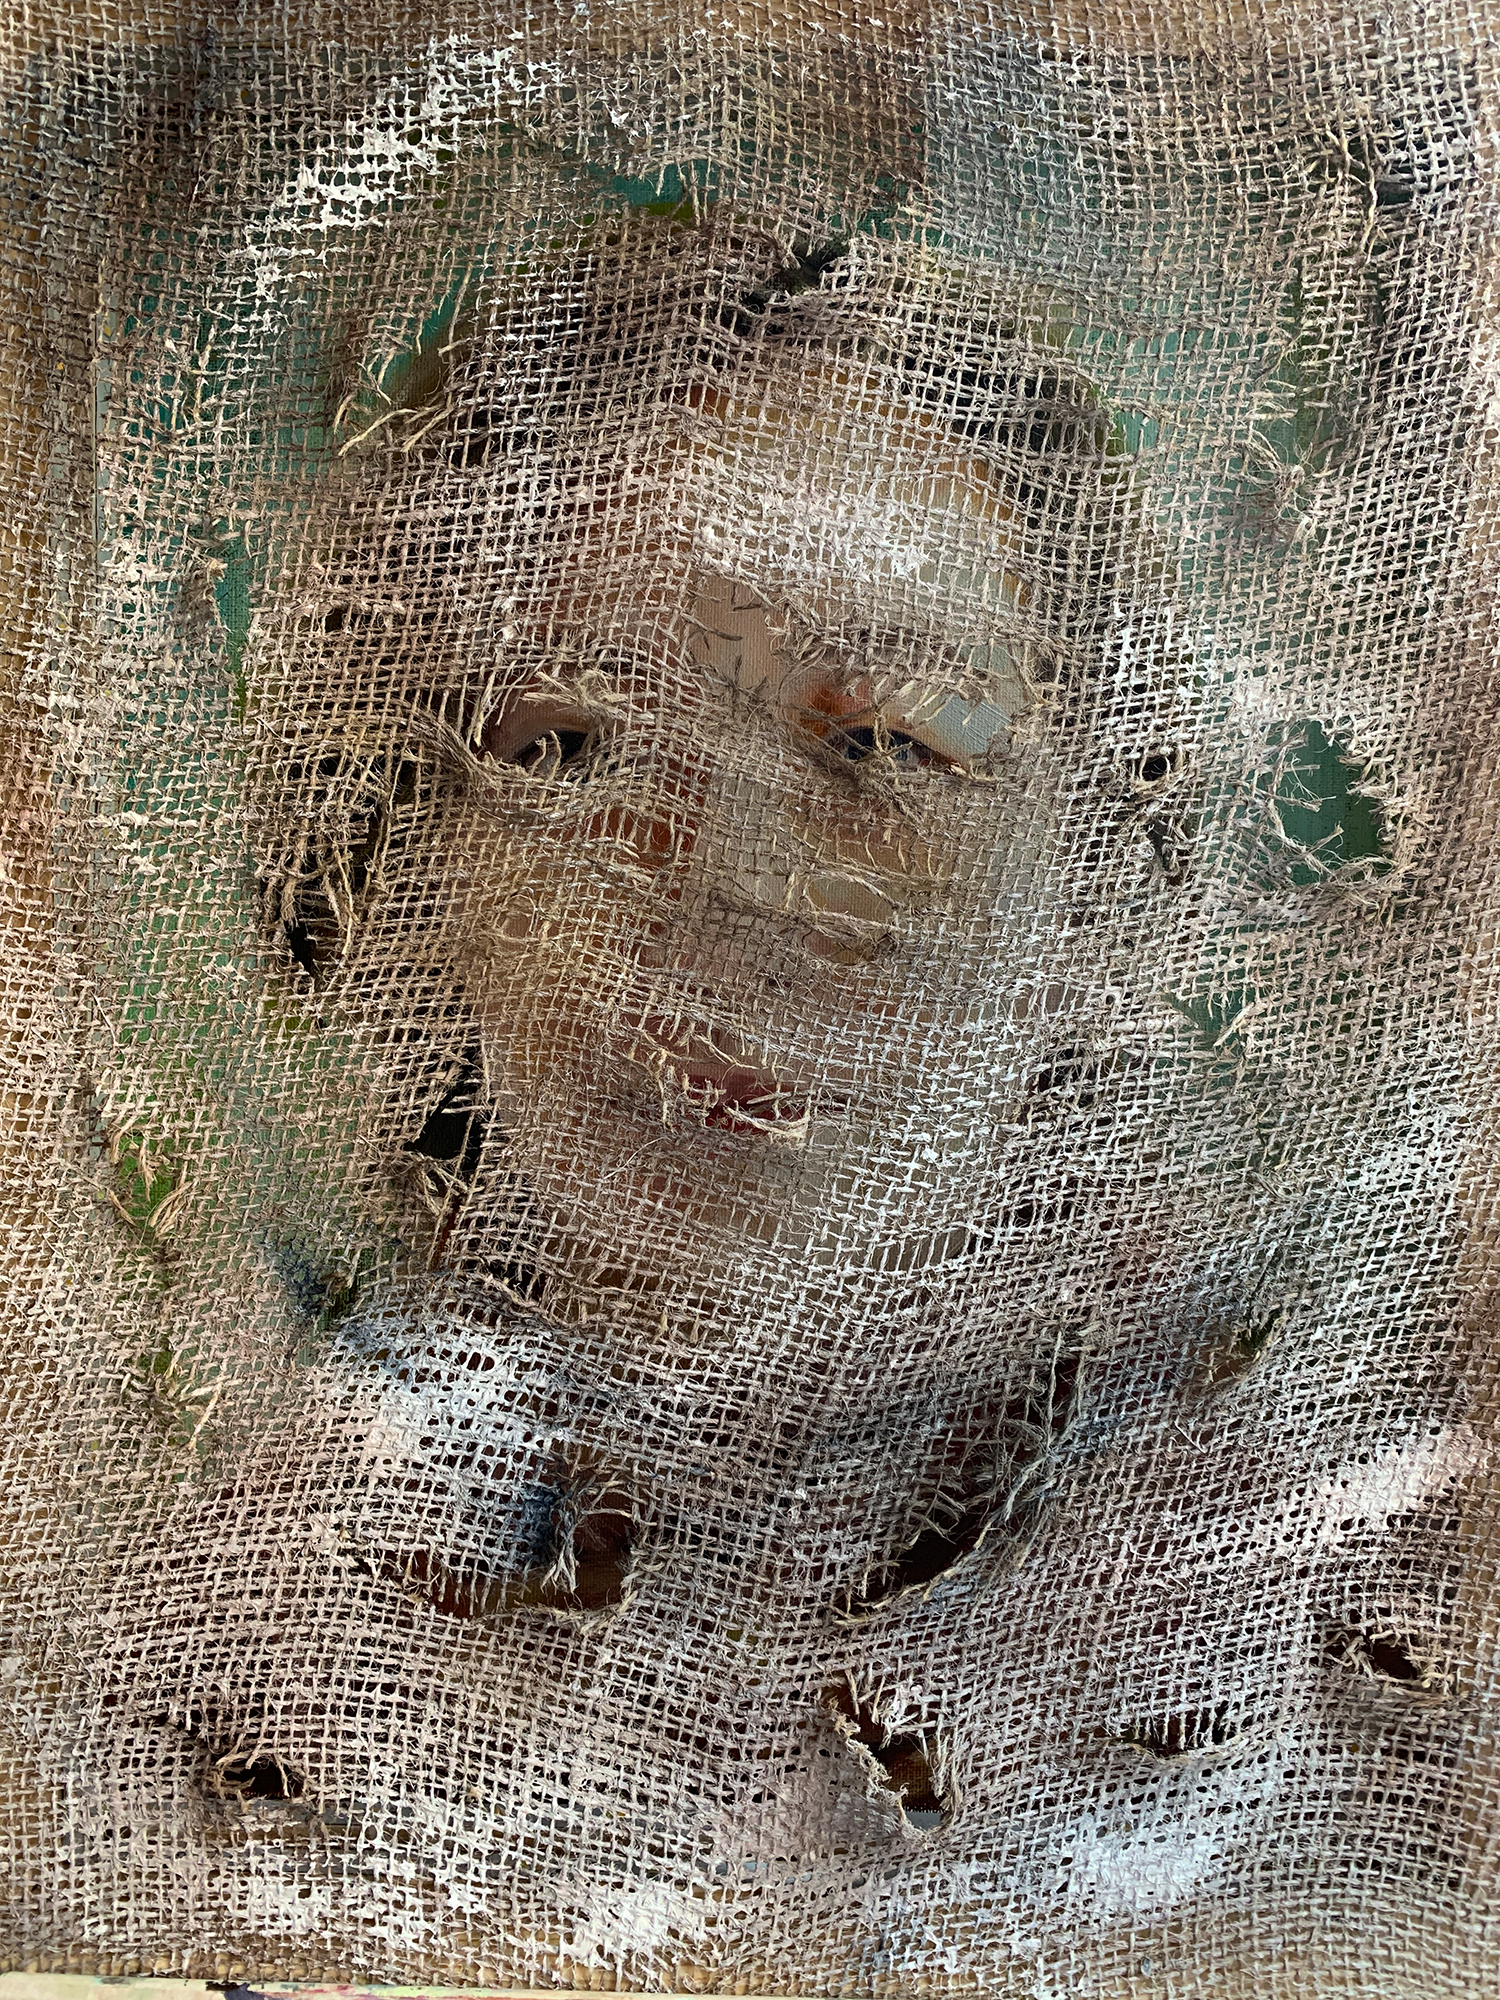 Self Portrait of Middle-Aged Woman